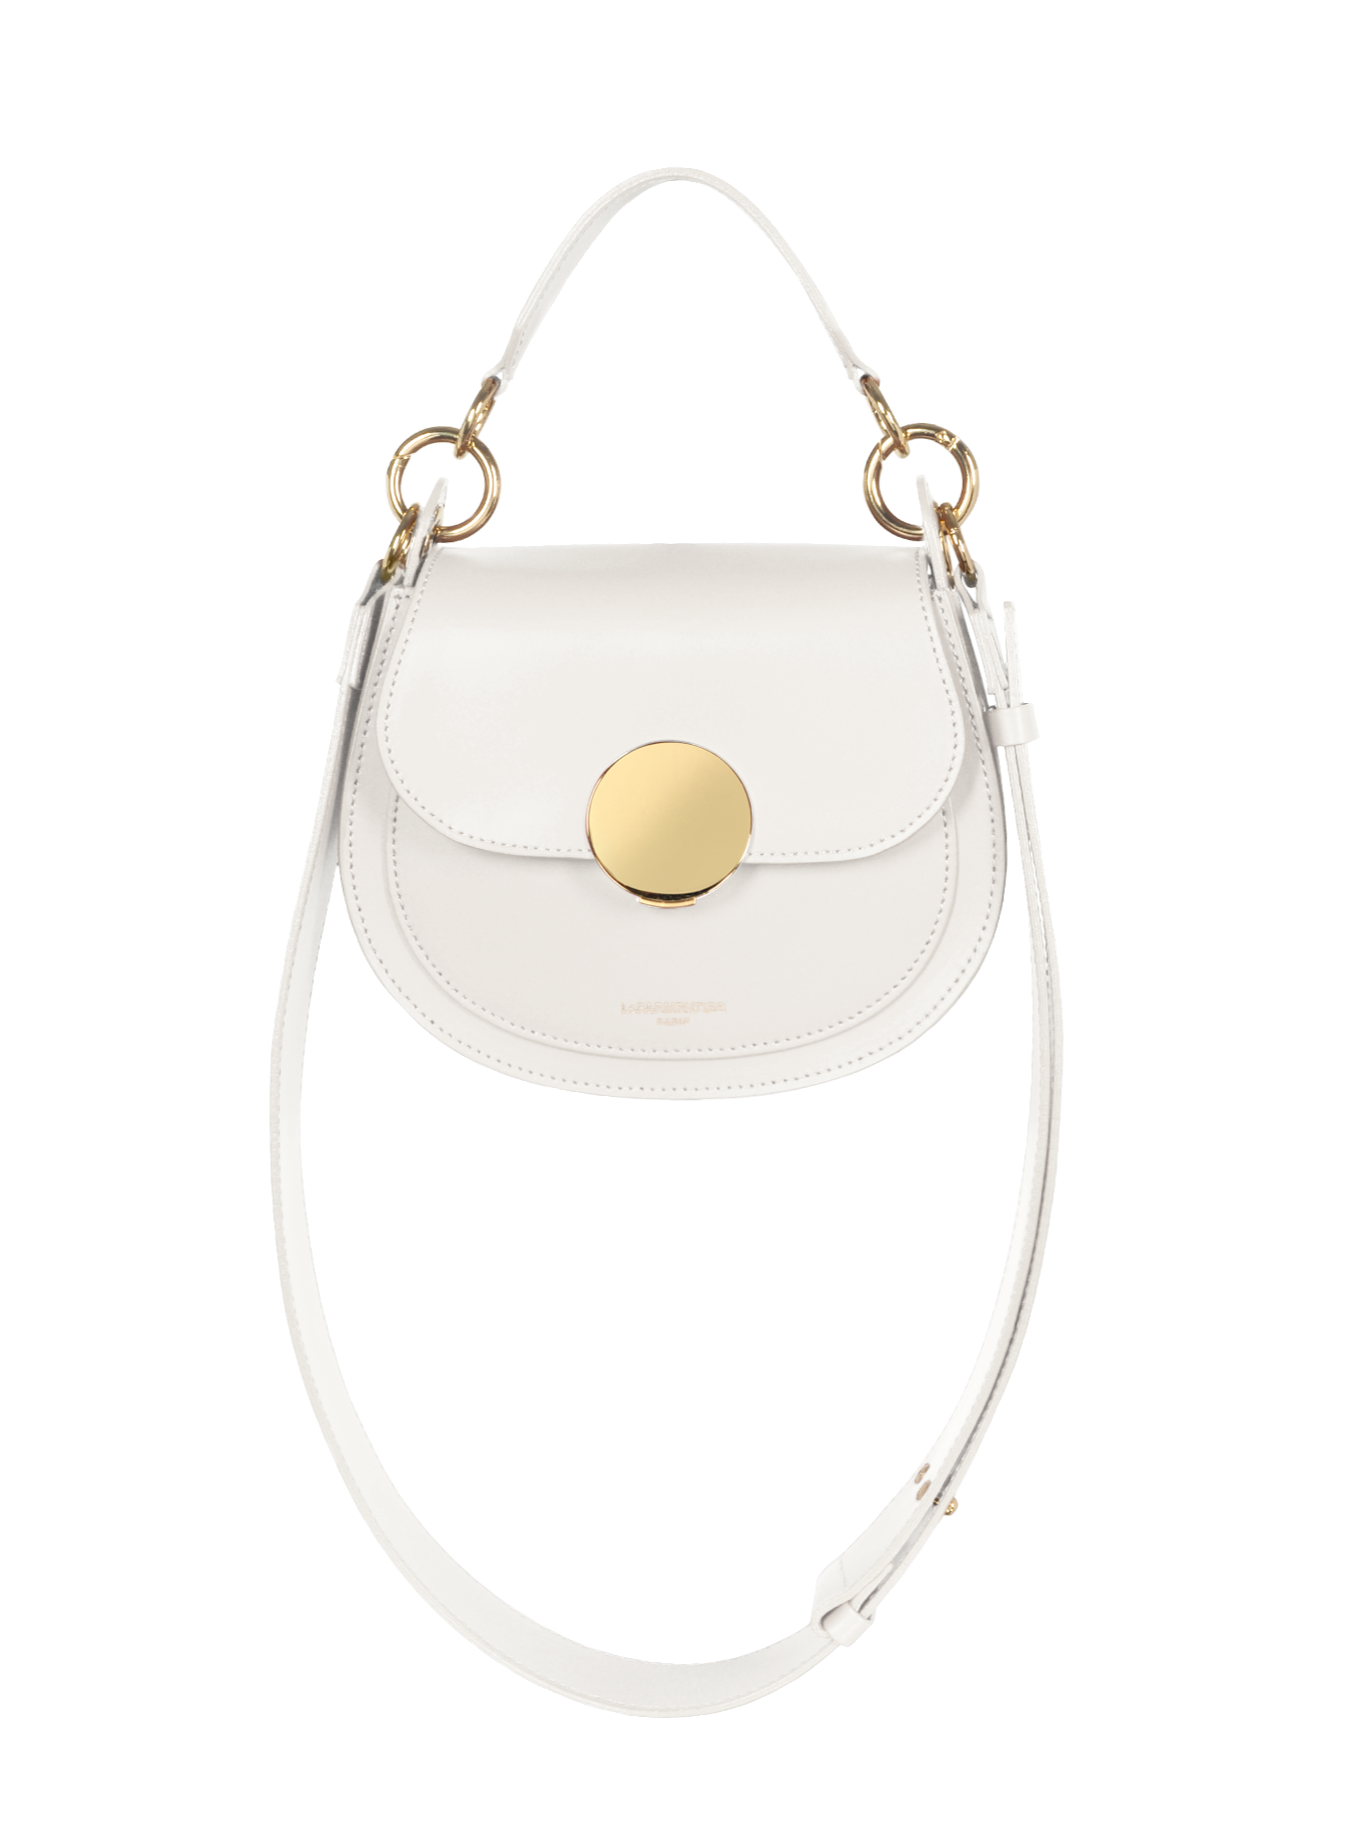 The Yucca Soho Shoulder Bag, from Le Parmentier at Mazzi D  Fiori, is made of smooth genuine Italian calf leather and features a modern interpretation of the classic saddle silhouette. It is designed to keep you organised throughout the day and perfect for casual fun nights. The bag includes a top handle, a flap top with a magnetic snap closure and bold hardware detail. There is also a pocket under the flap for additional storage. The wide shoulder strap is adjustable for your comfort. 